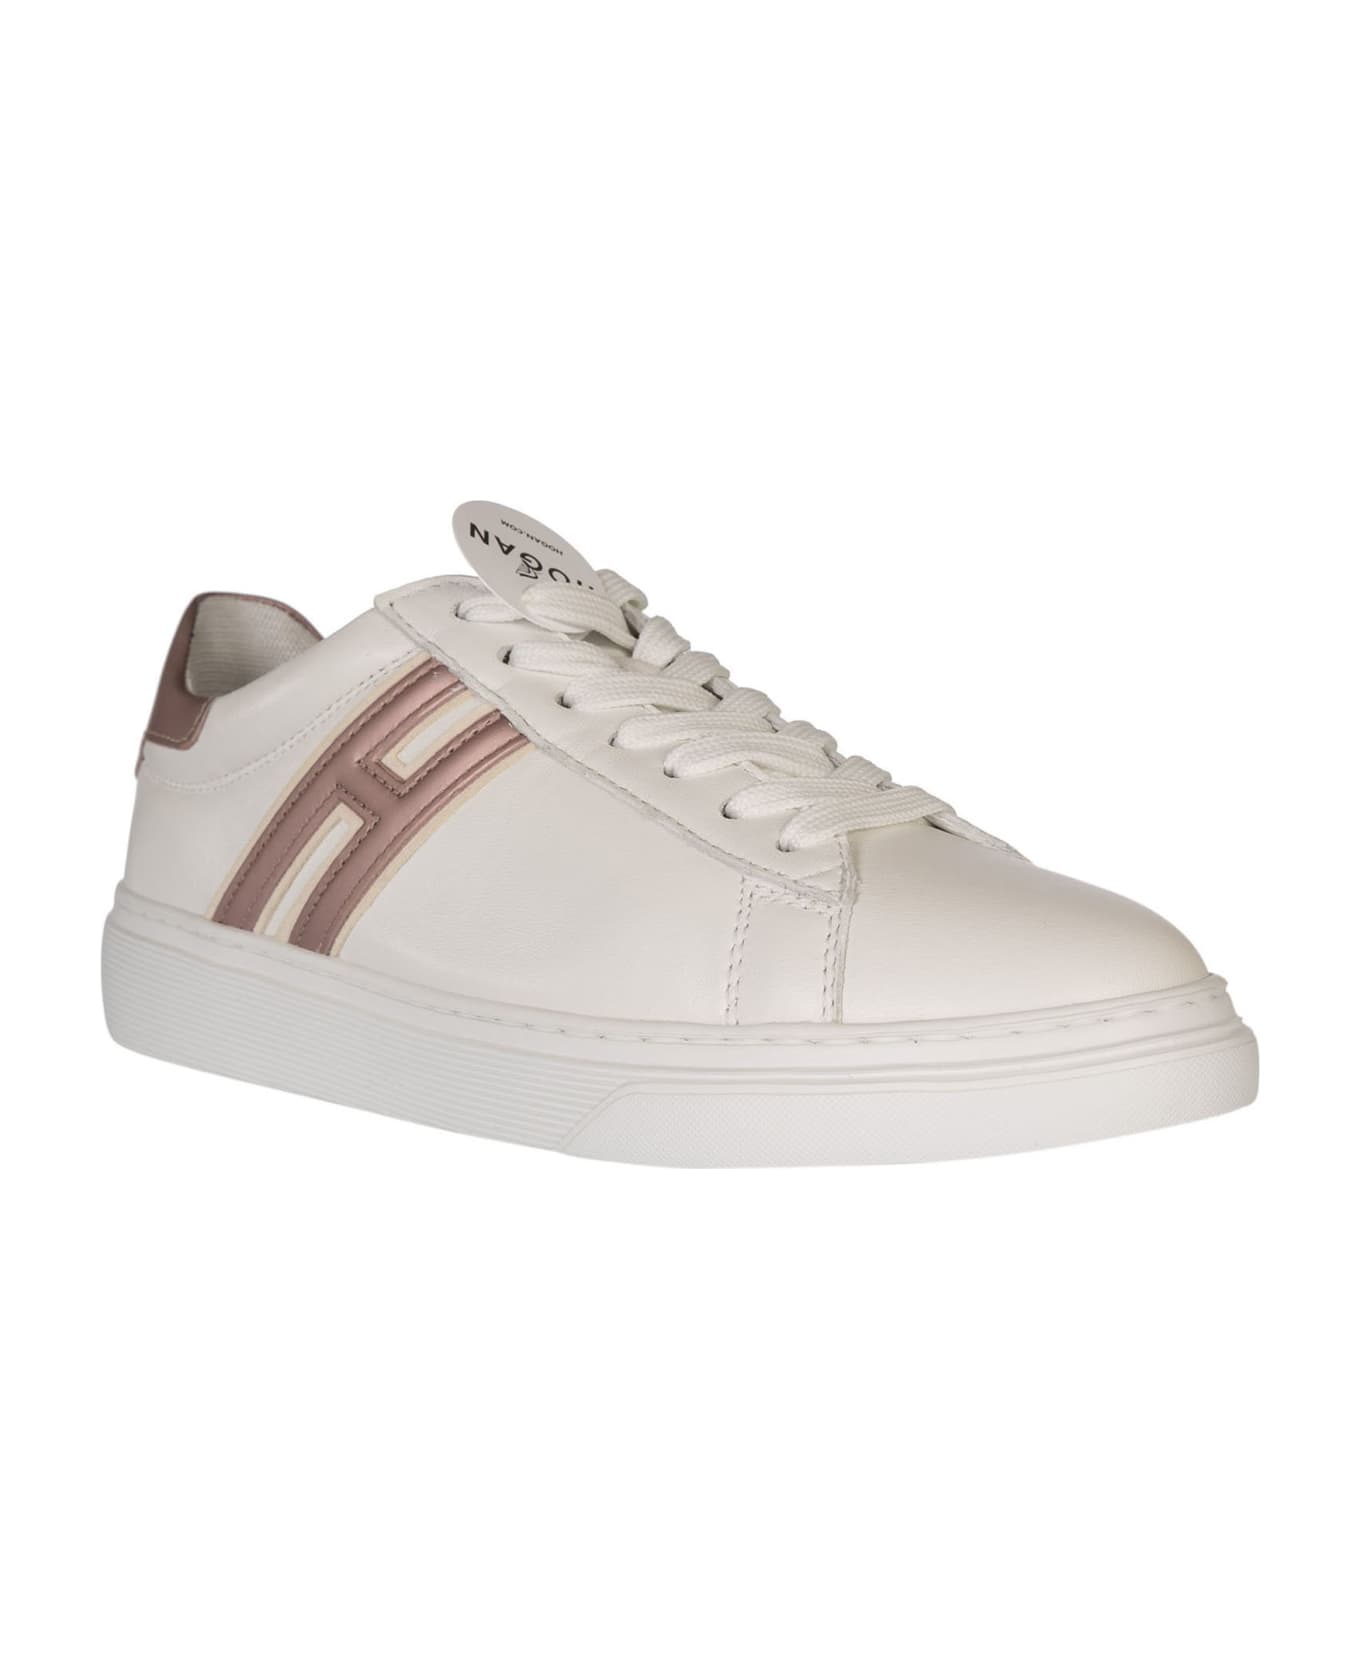 Hogan H365 Canaletto Sneakers - White スニーカー